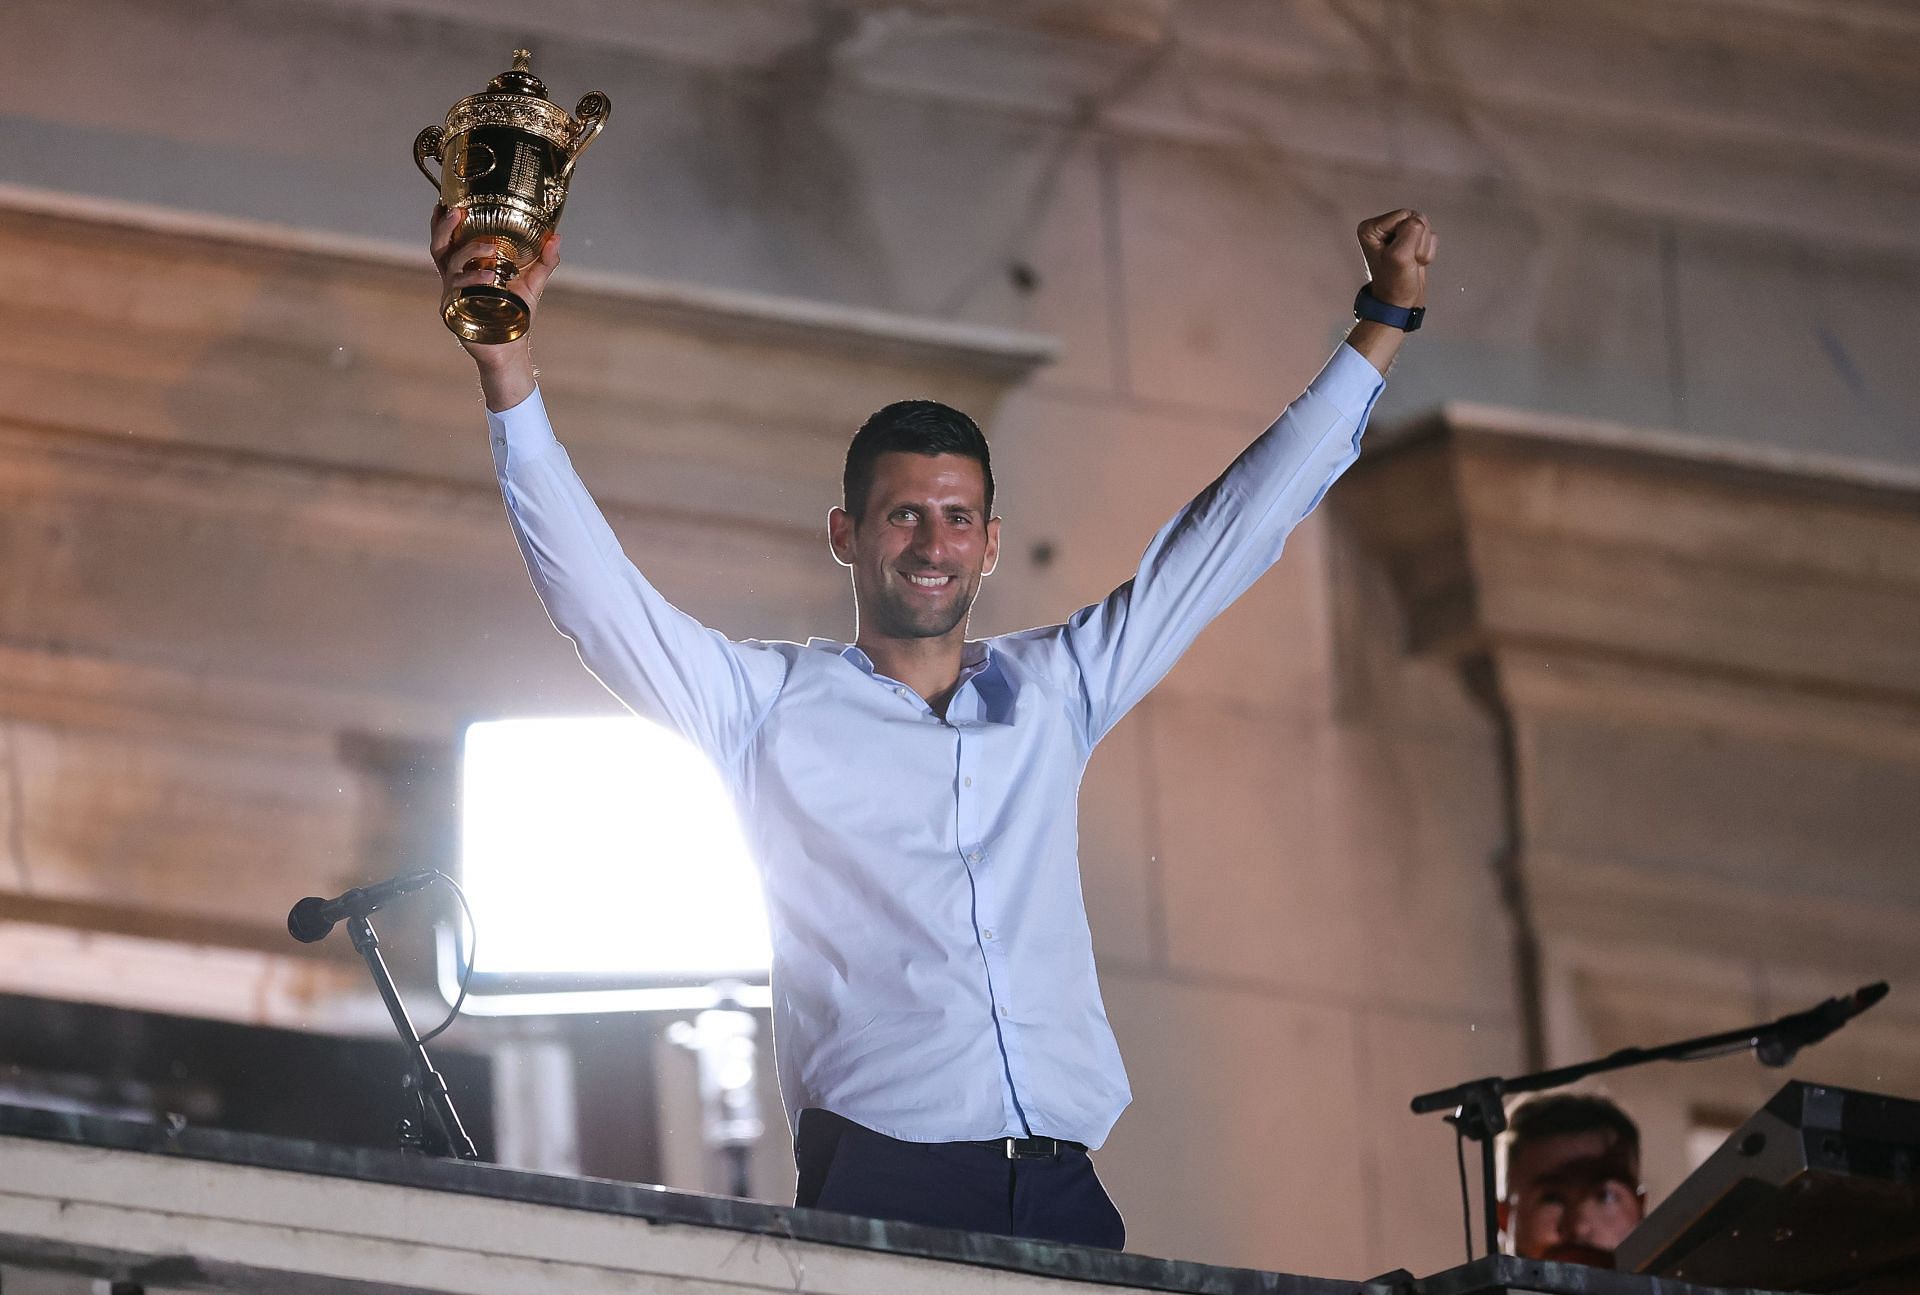 Novak Djokovic admitted that anything he wins from now on will be an added bonus for him